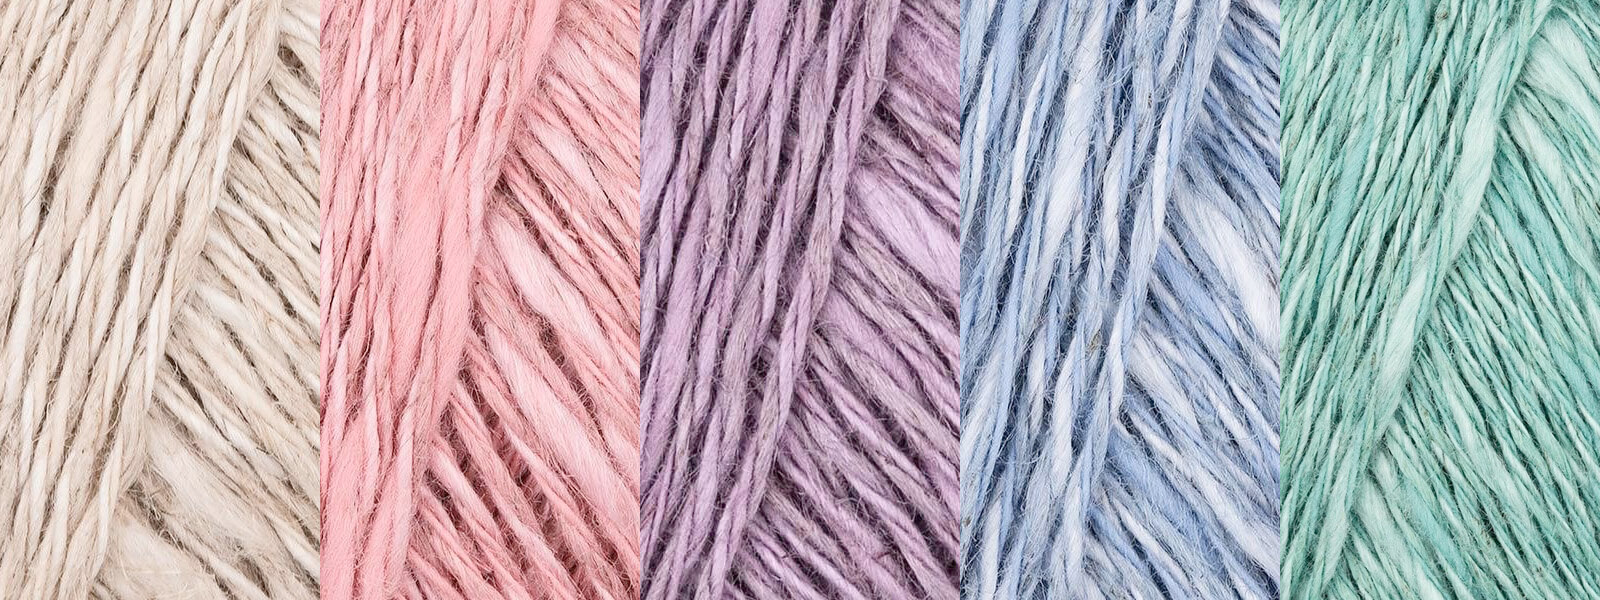 Natura linen is a linen blend yarn available in a range of icy pastel colors at LoveCrafts.